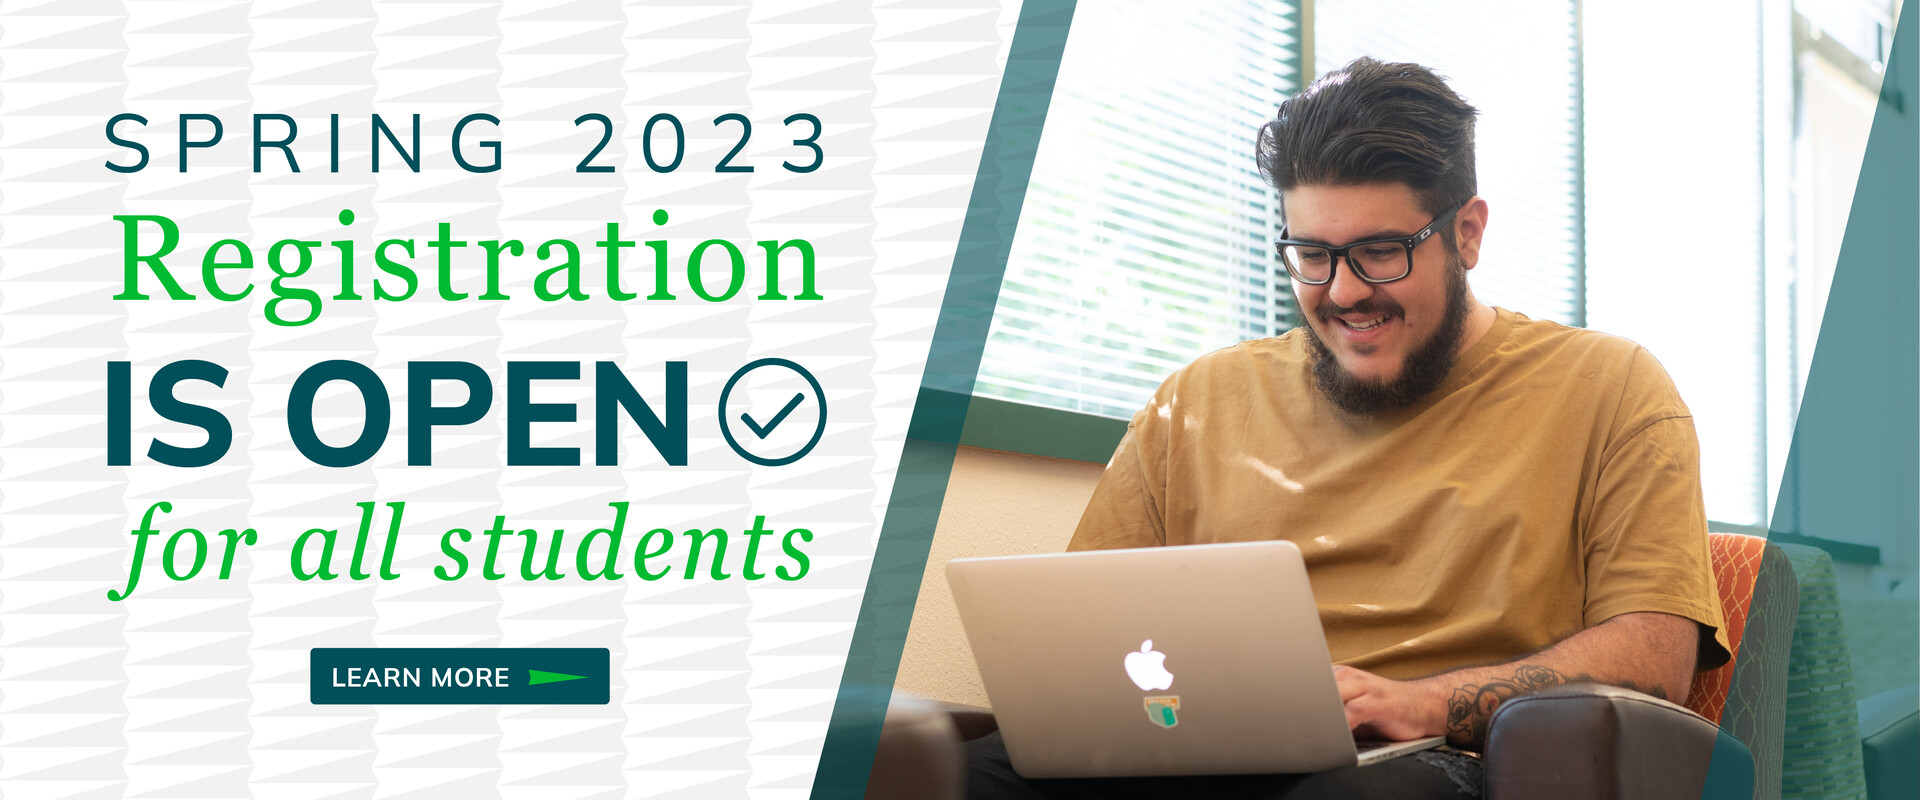 Spring 2023 Registration is open for all students